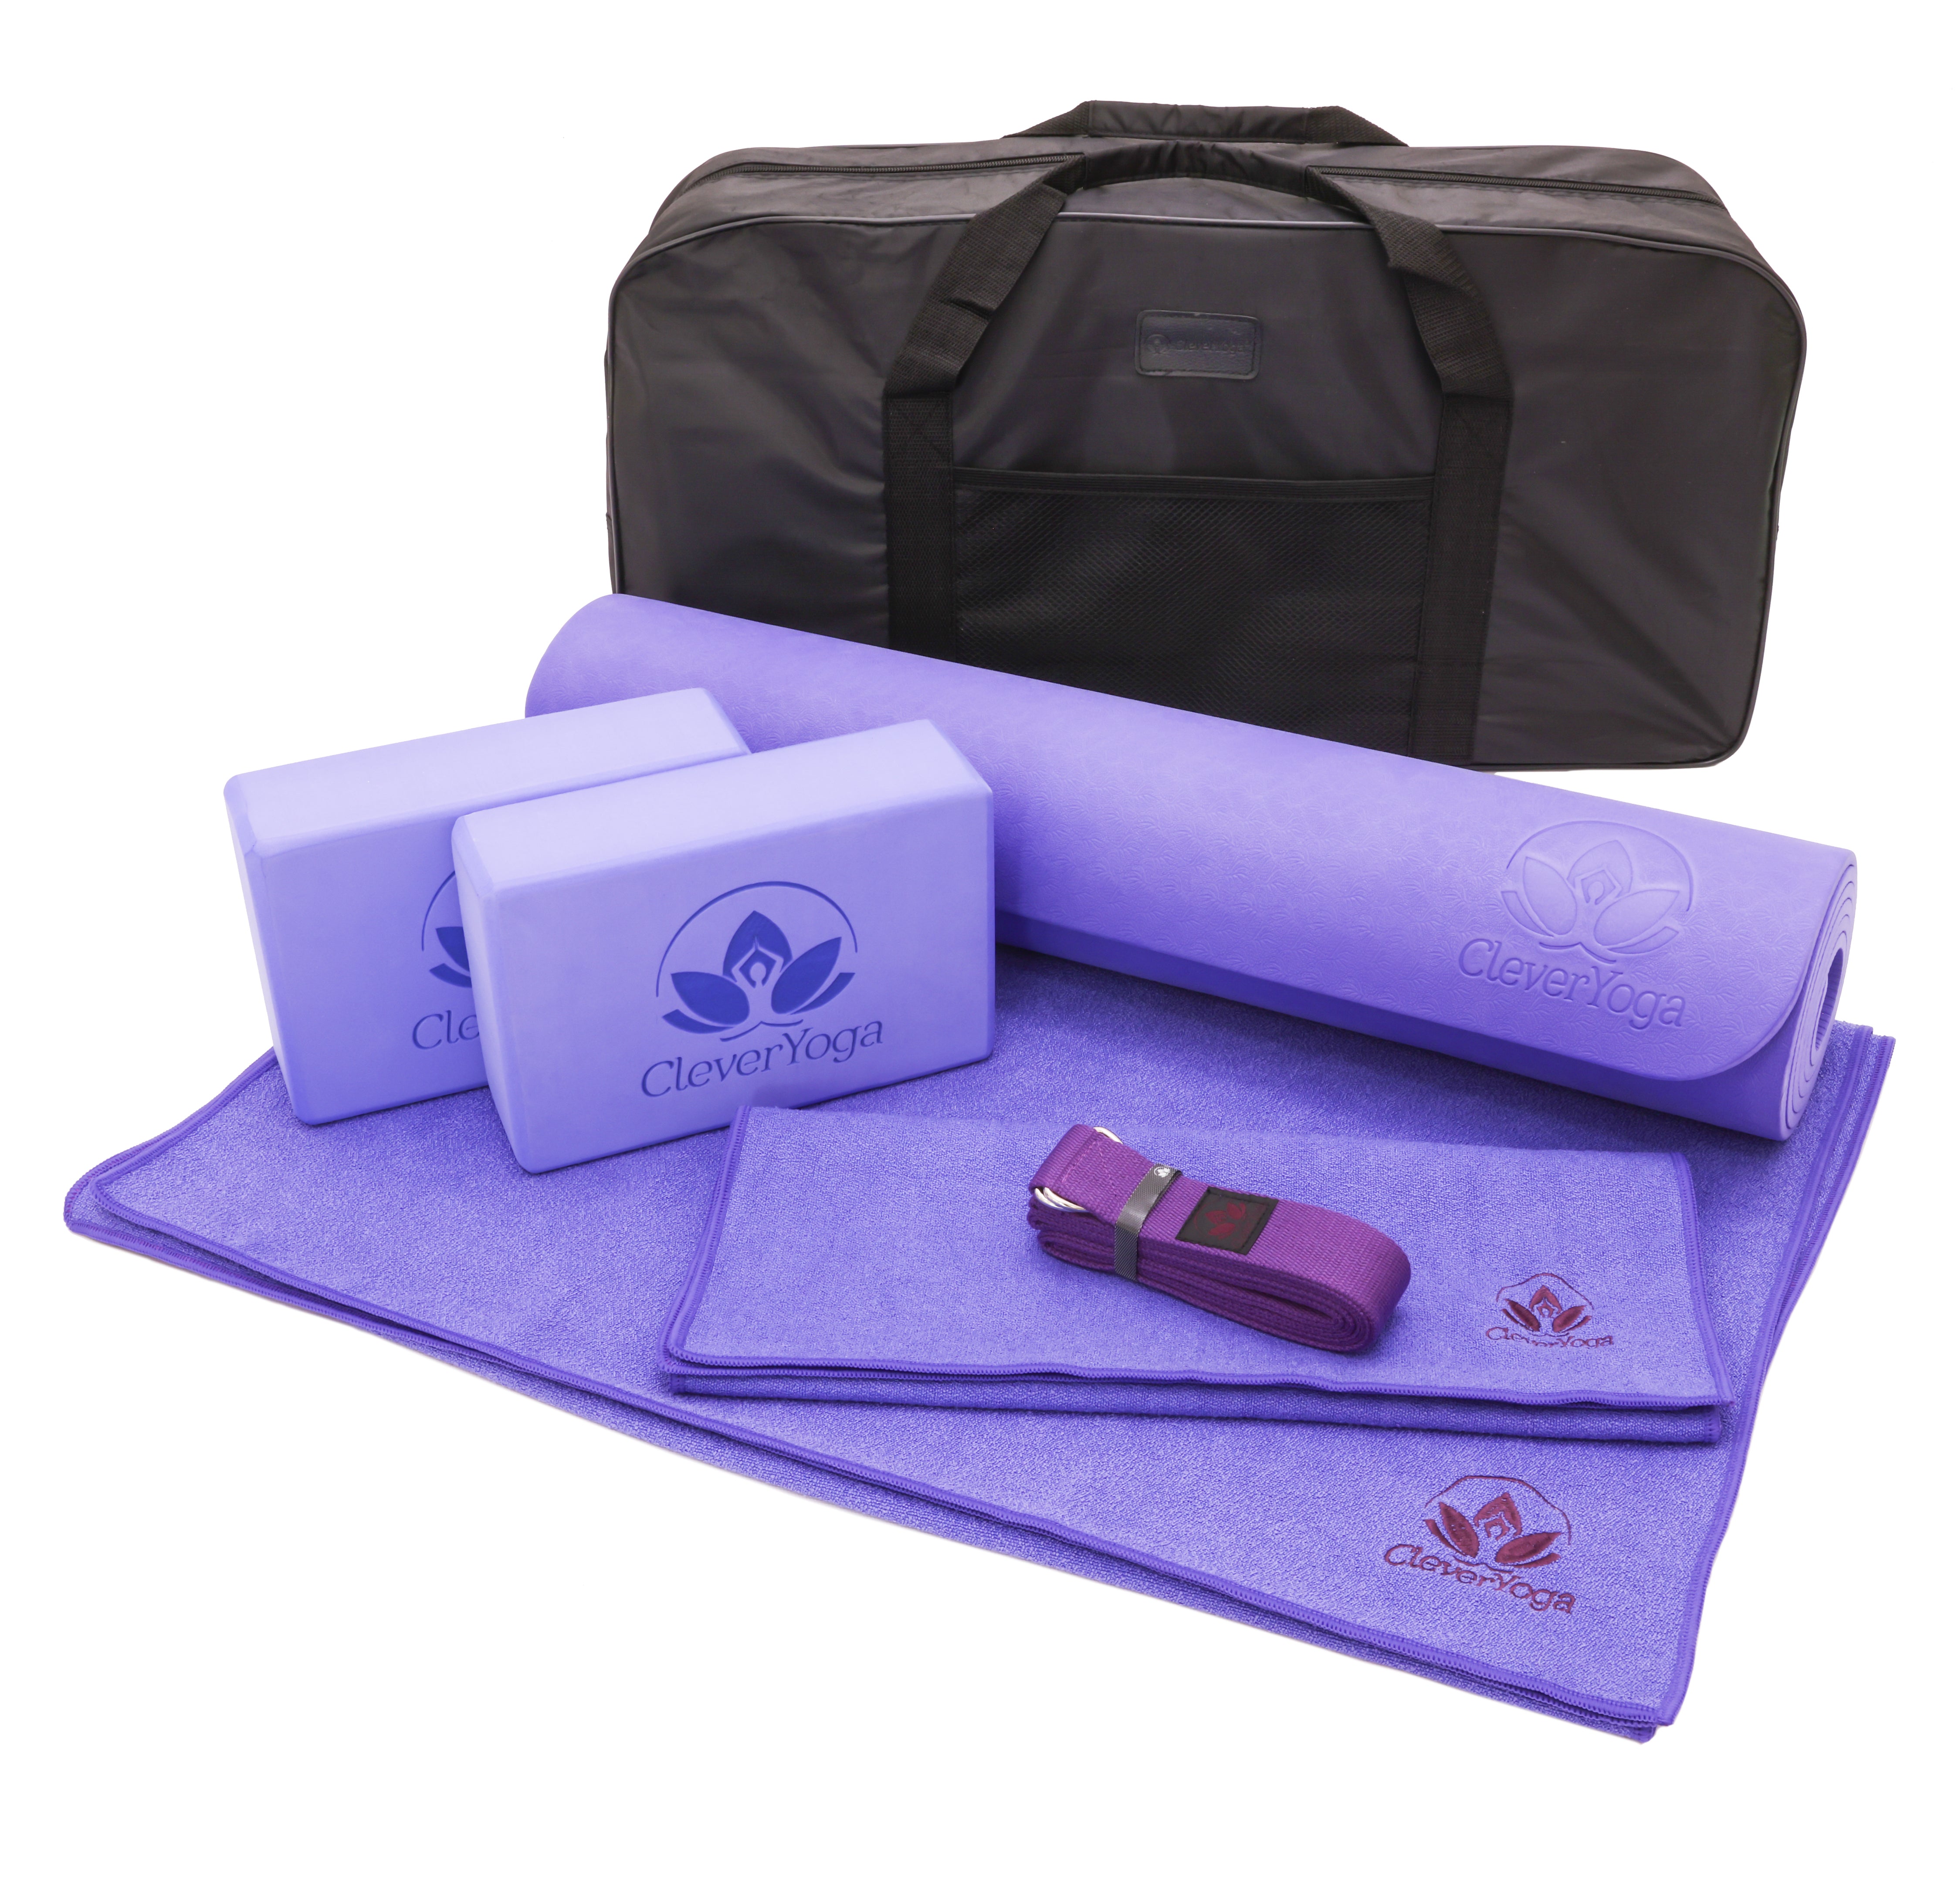 keefee 11 pcs Yoga Starter Sets,Yoga Accessories Kit for Beginners